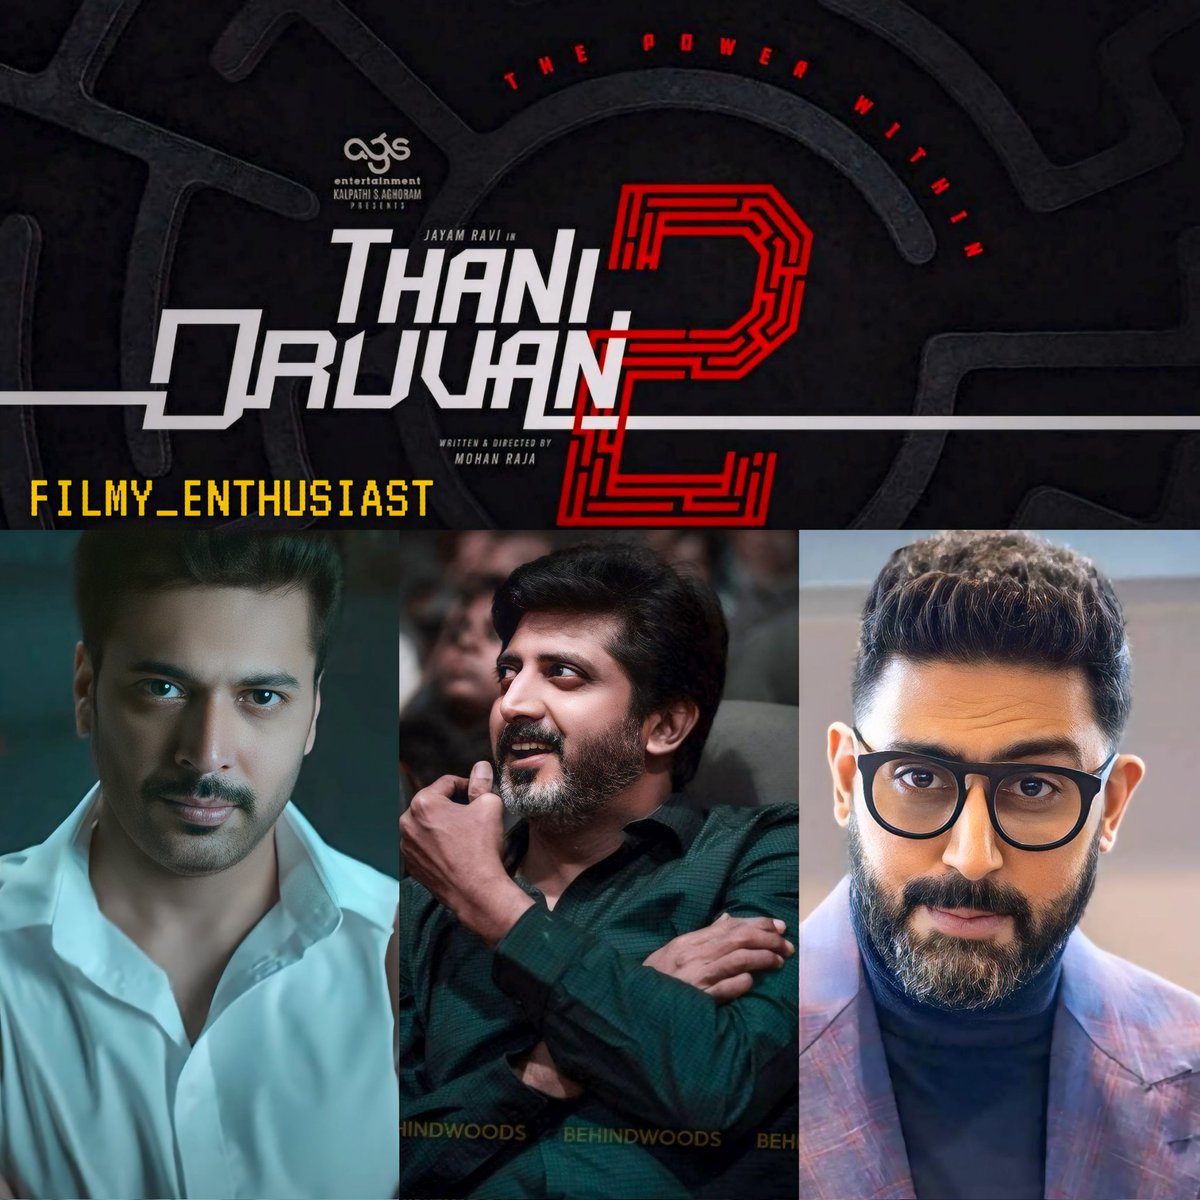 🔹#AbhishekBachchan Plays #JayamRavi 's Villain In #ThaniOruvan2👤🔥

🔹The Shooting Of The Film Will Begin By The End Of This Year 🎬

🔹#MohanRaja Is In Talks To Do A Film With 𝗔𝗷𝗶𝘁𝗵 𝗞𝘂𝗺𝗮𝗿 ' #AK64 ' And 𝗖𝗵𝗶𝗿𝗮𝗻𝗷𝗲𝗲𝘃𝗶 Next 🎞️